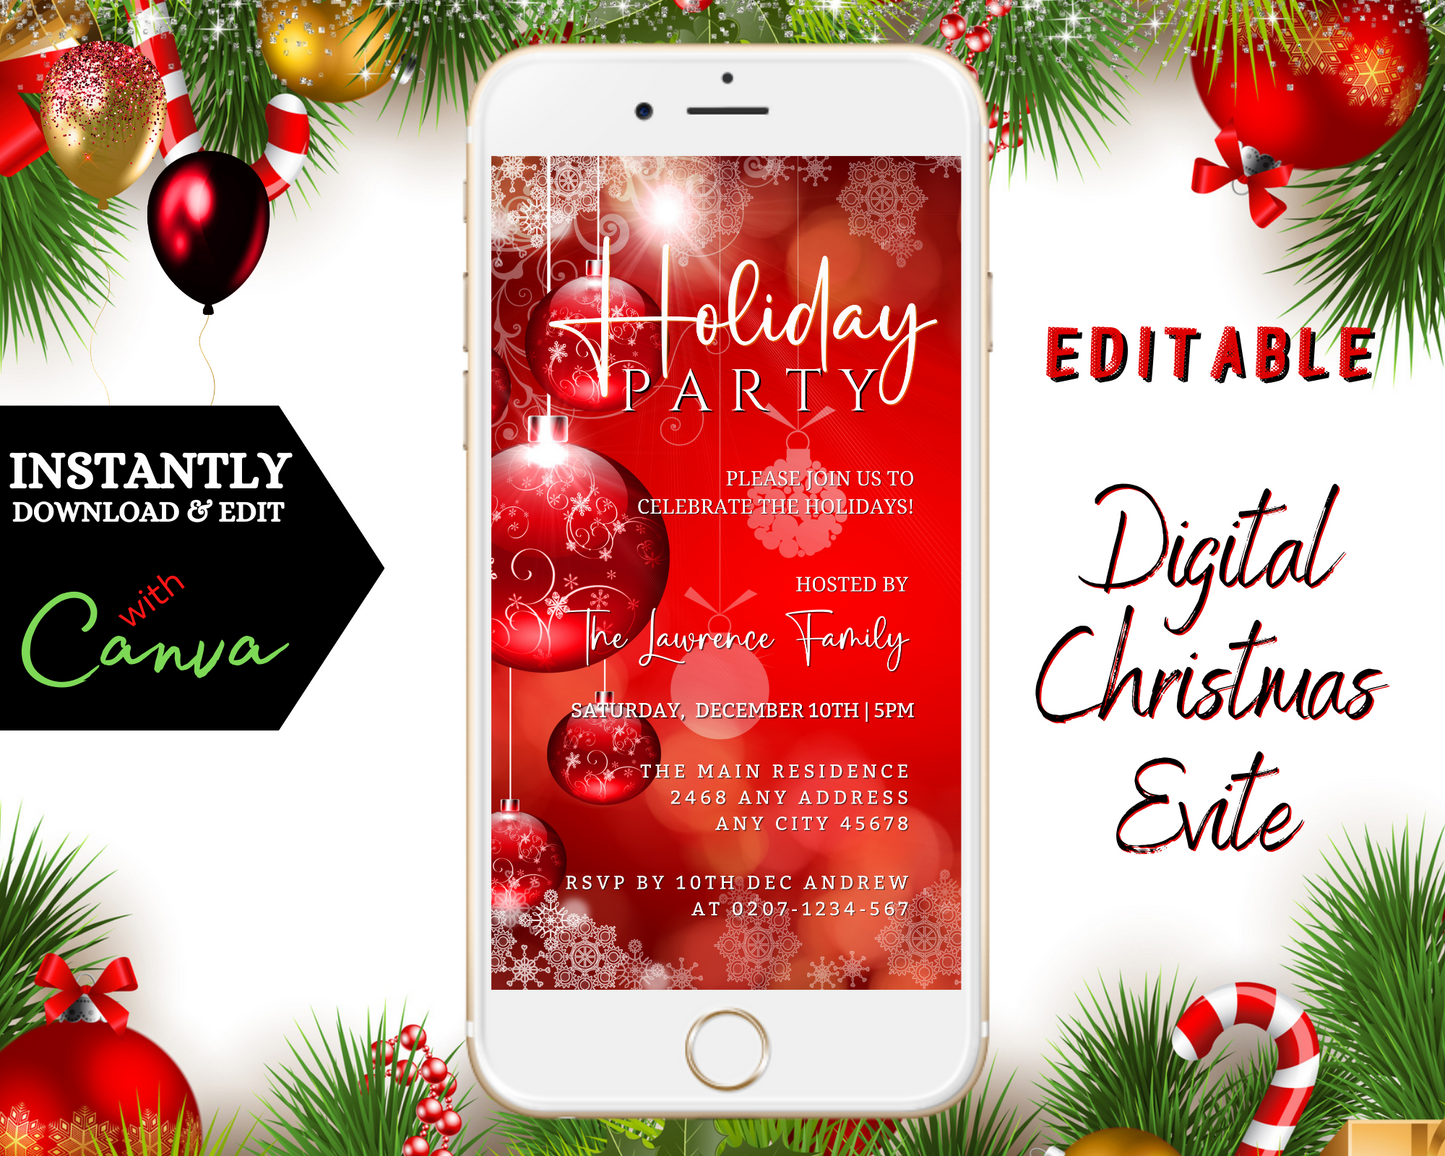 Glowing Red White Ornaments | Holiday Party Invitation displayed on a smartphone with festive red and gold ornaments and candy canes. Editable and downloadable for personalization.